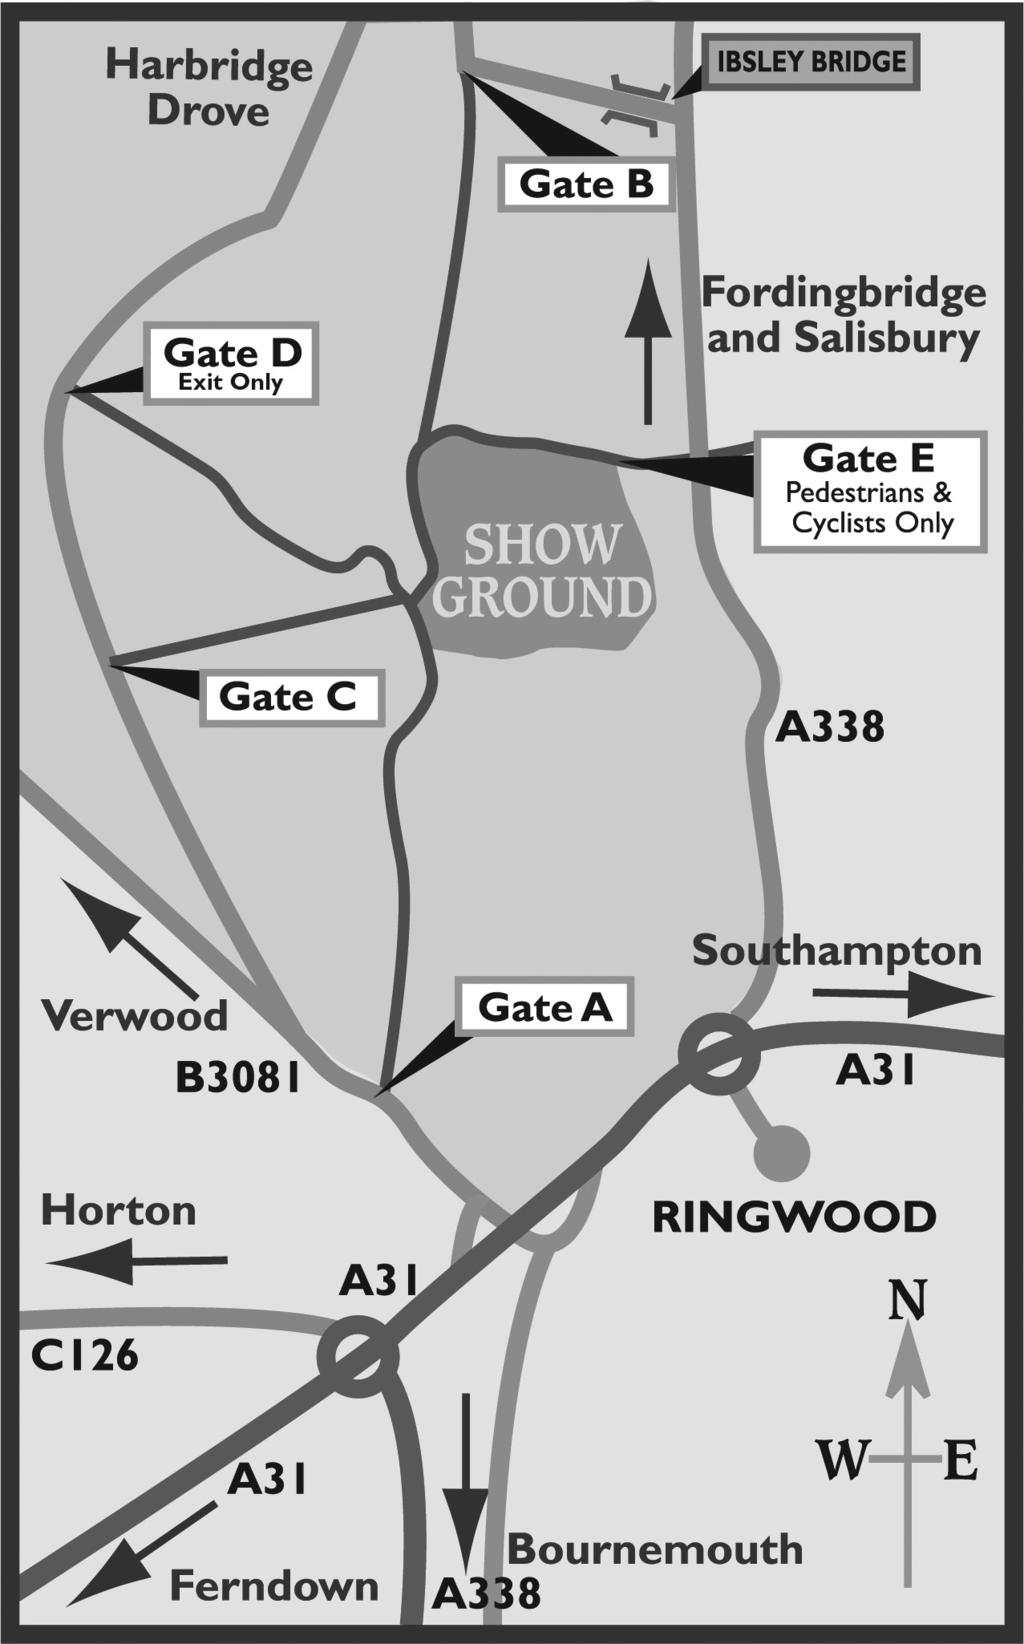 For For further further details details of of entrances and and exits exits to to the the Showground, please please check check the the website at at www.ellinghamshow.co.